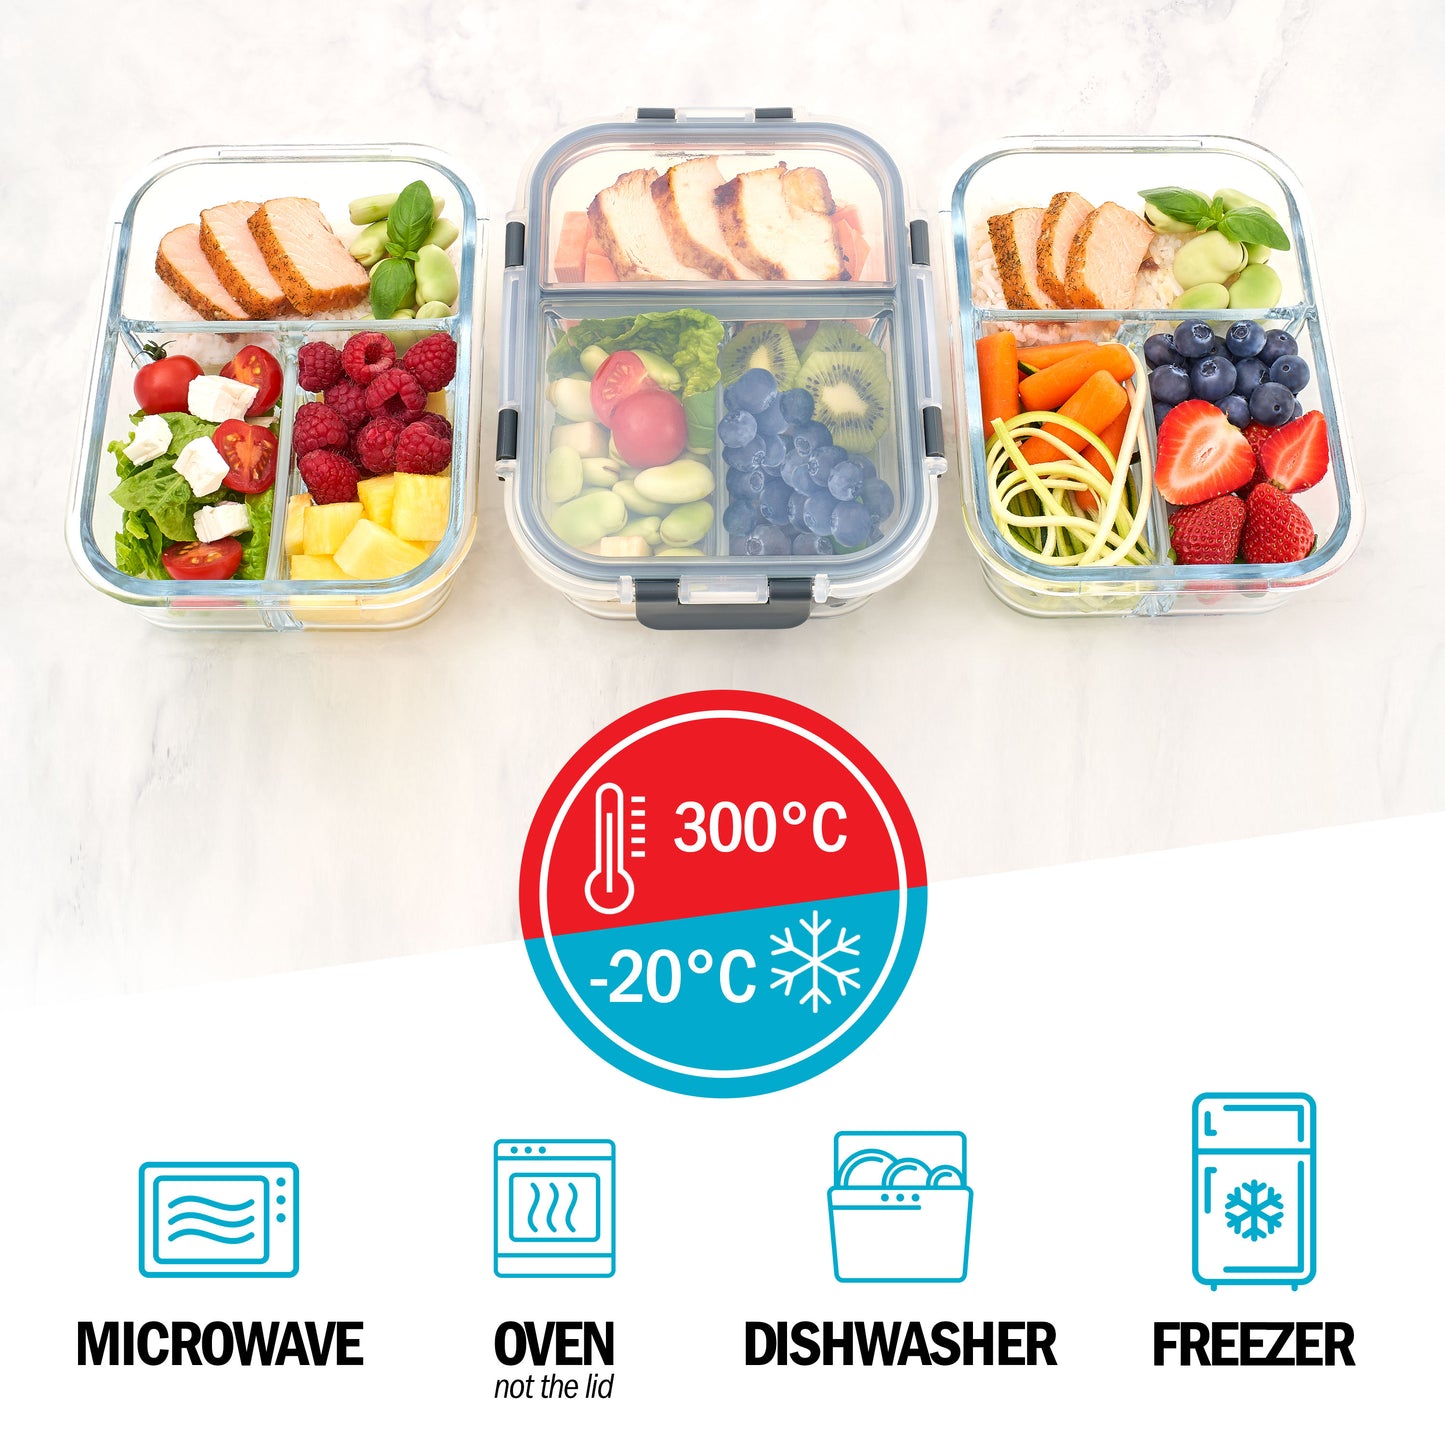 3 Compartment Glass Meal Prep Containers with Locking Lids - 3 Pack